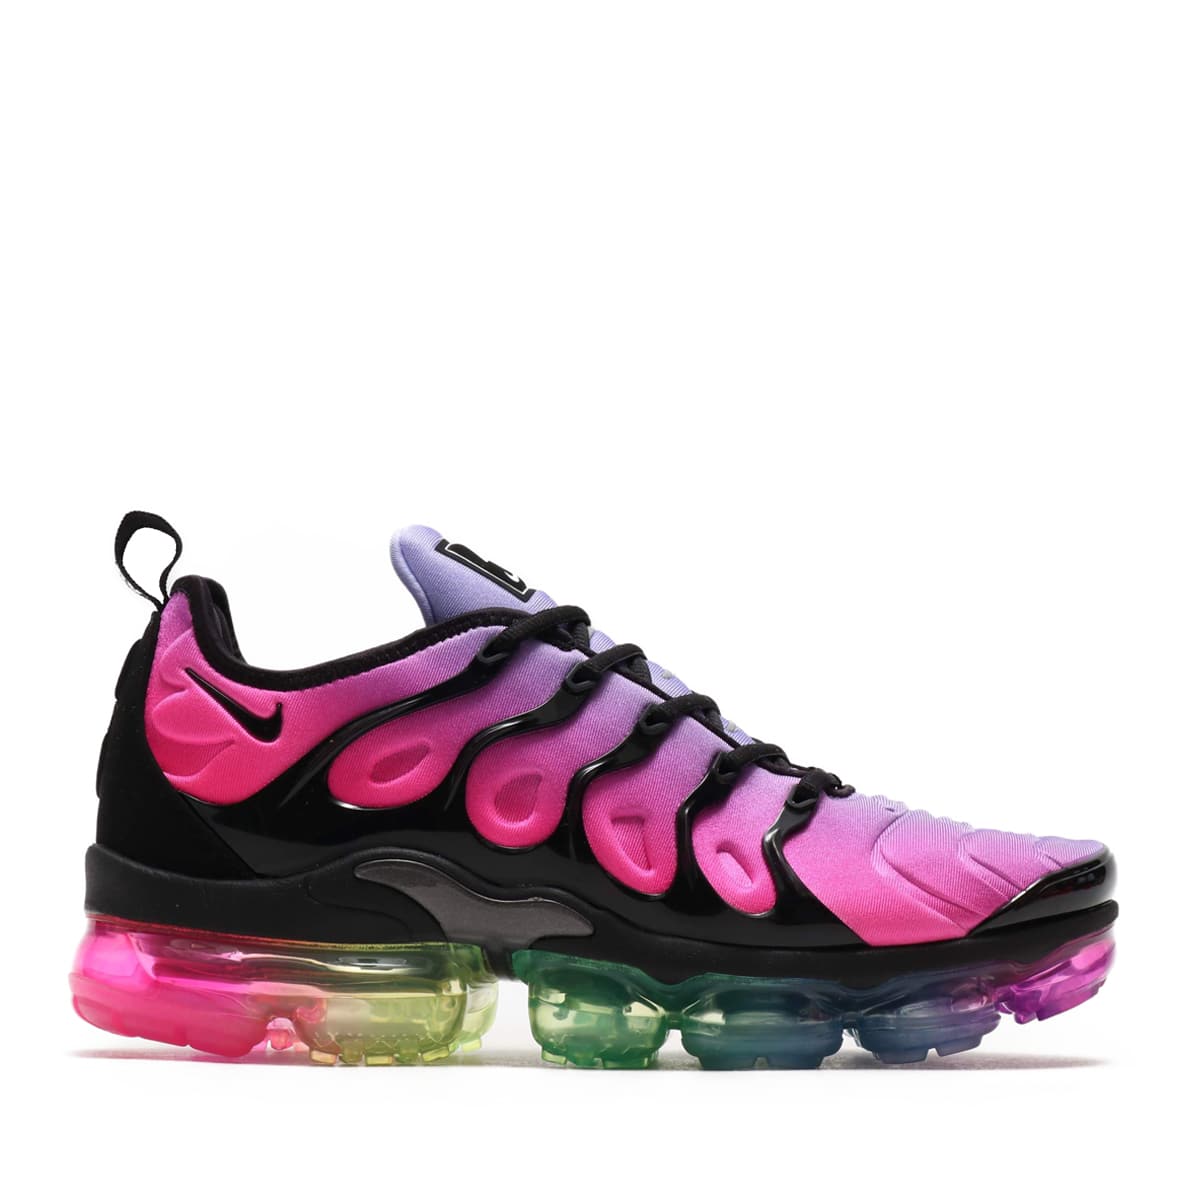 vapormax plus black and pink